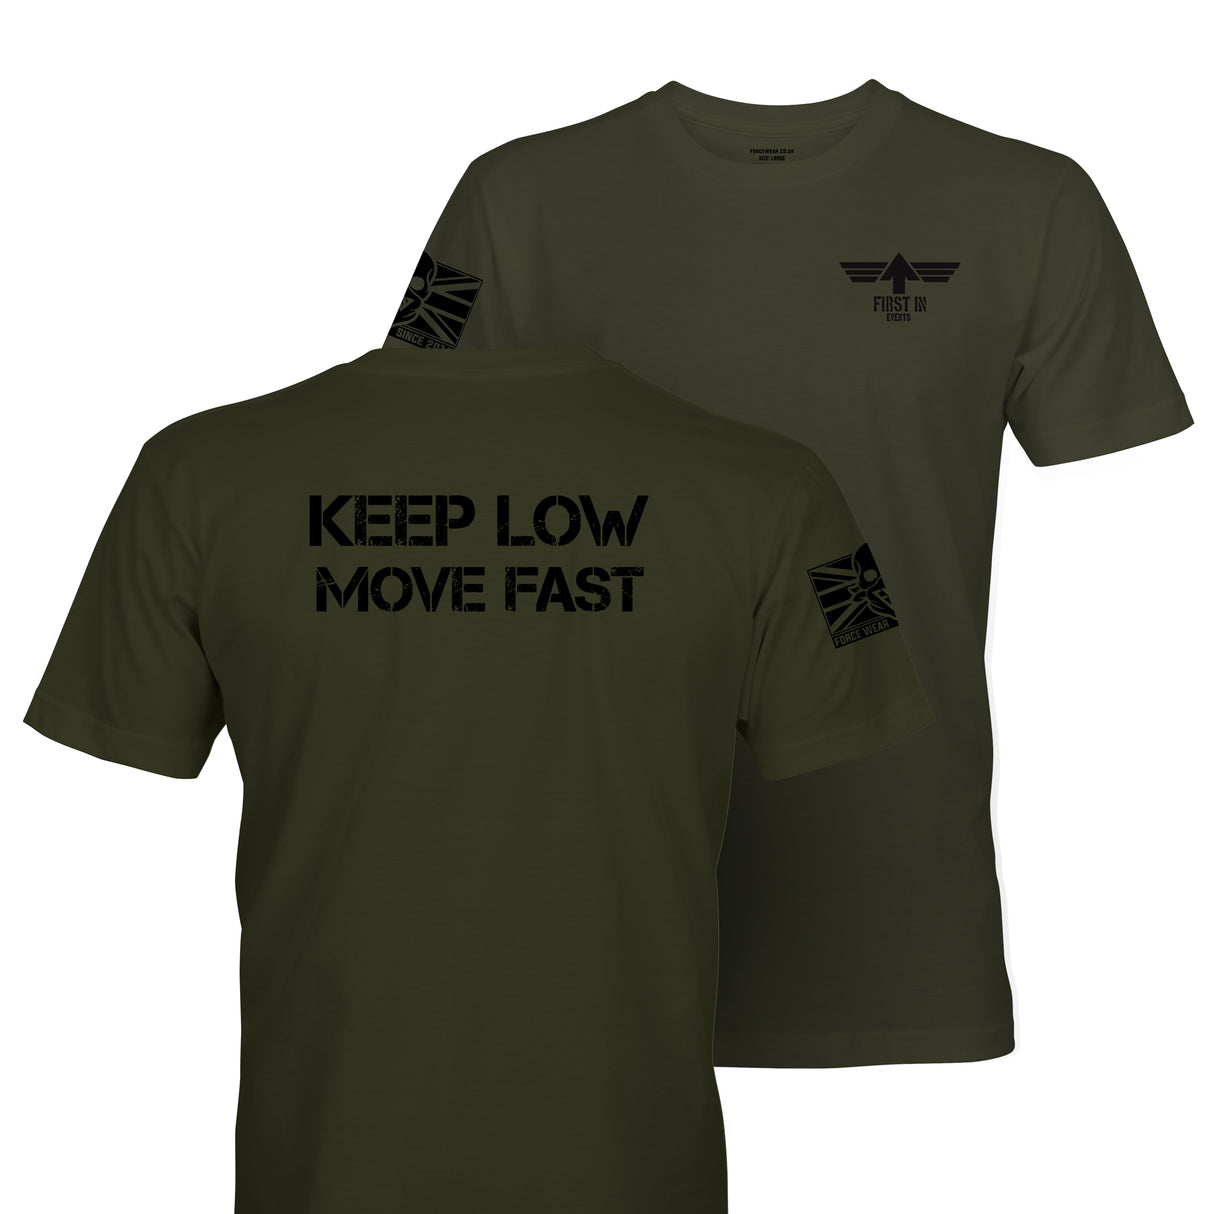 KEEP LOW MOVE FAST TAG & BACK